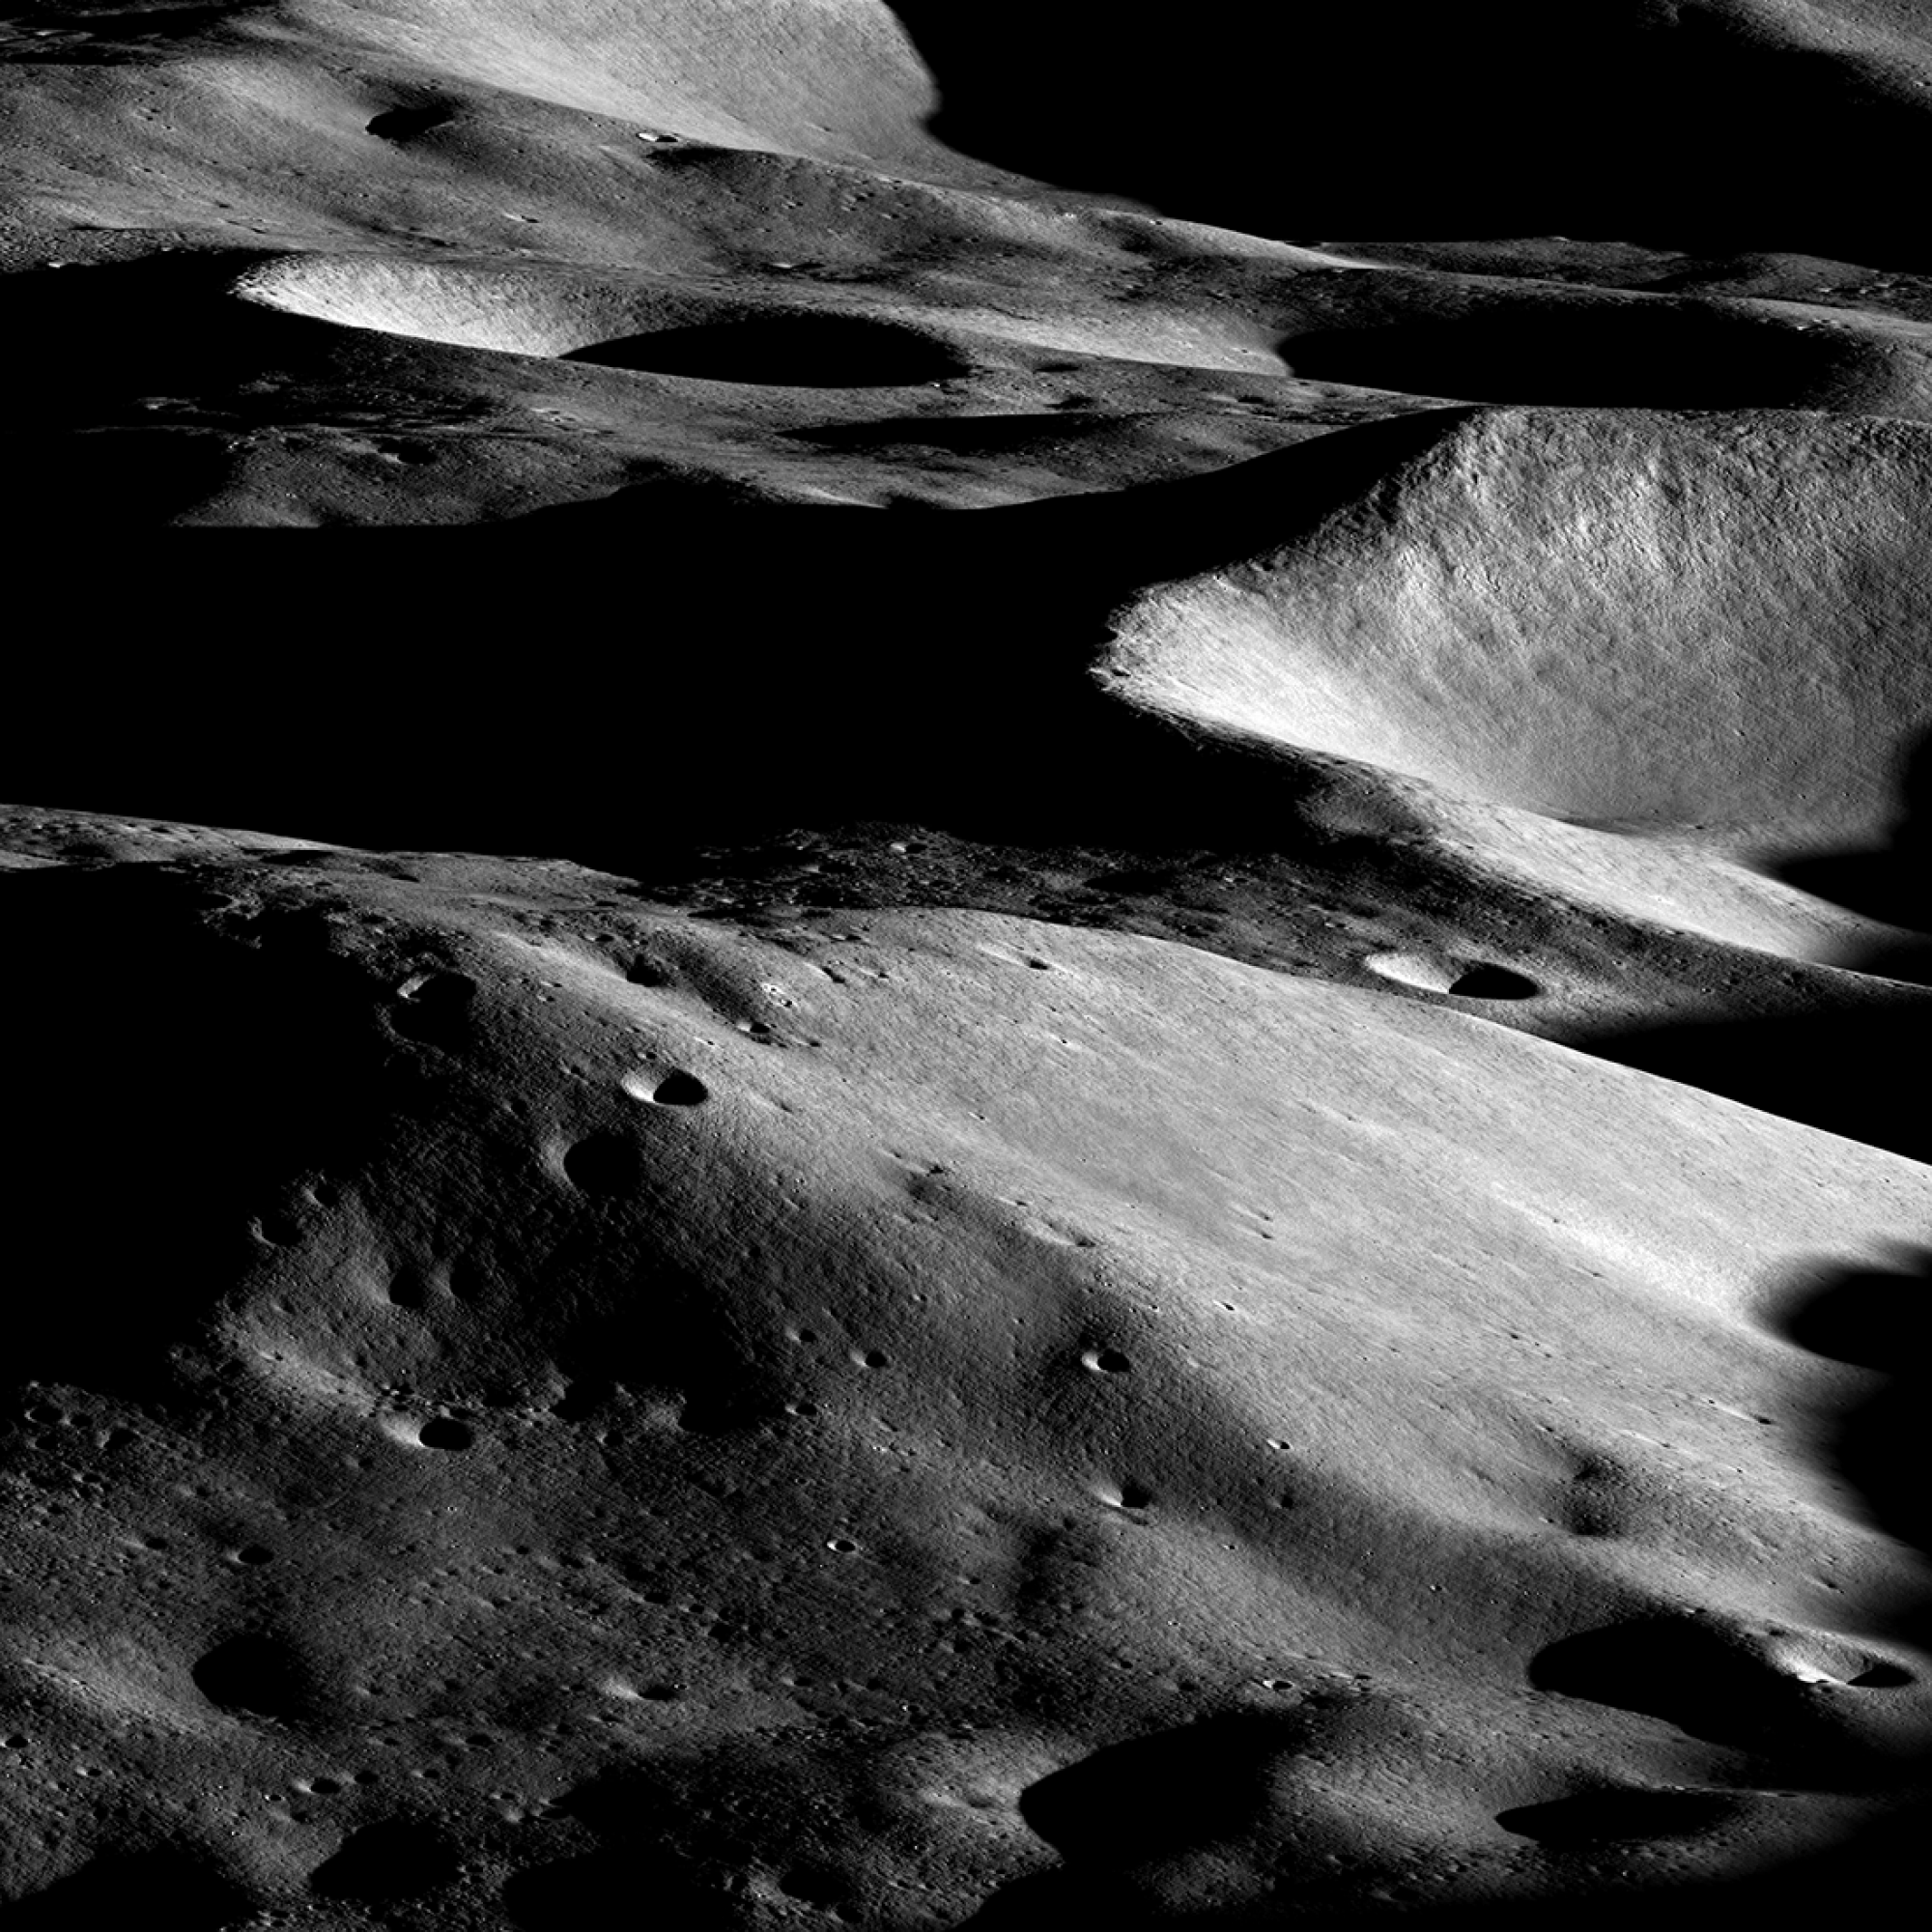 Hunting for ice at the lunar south pole